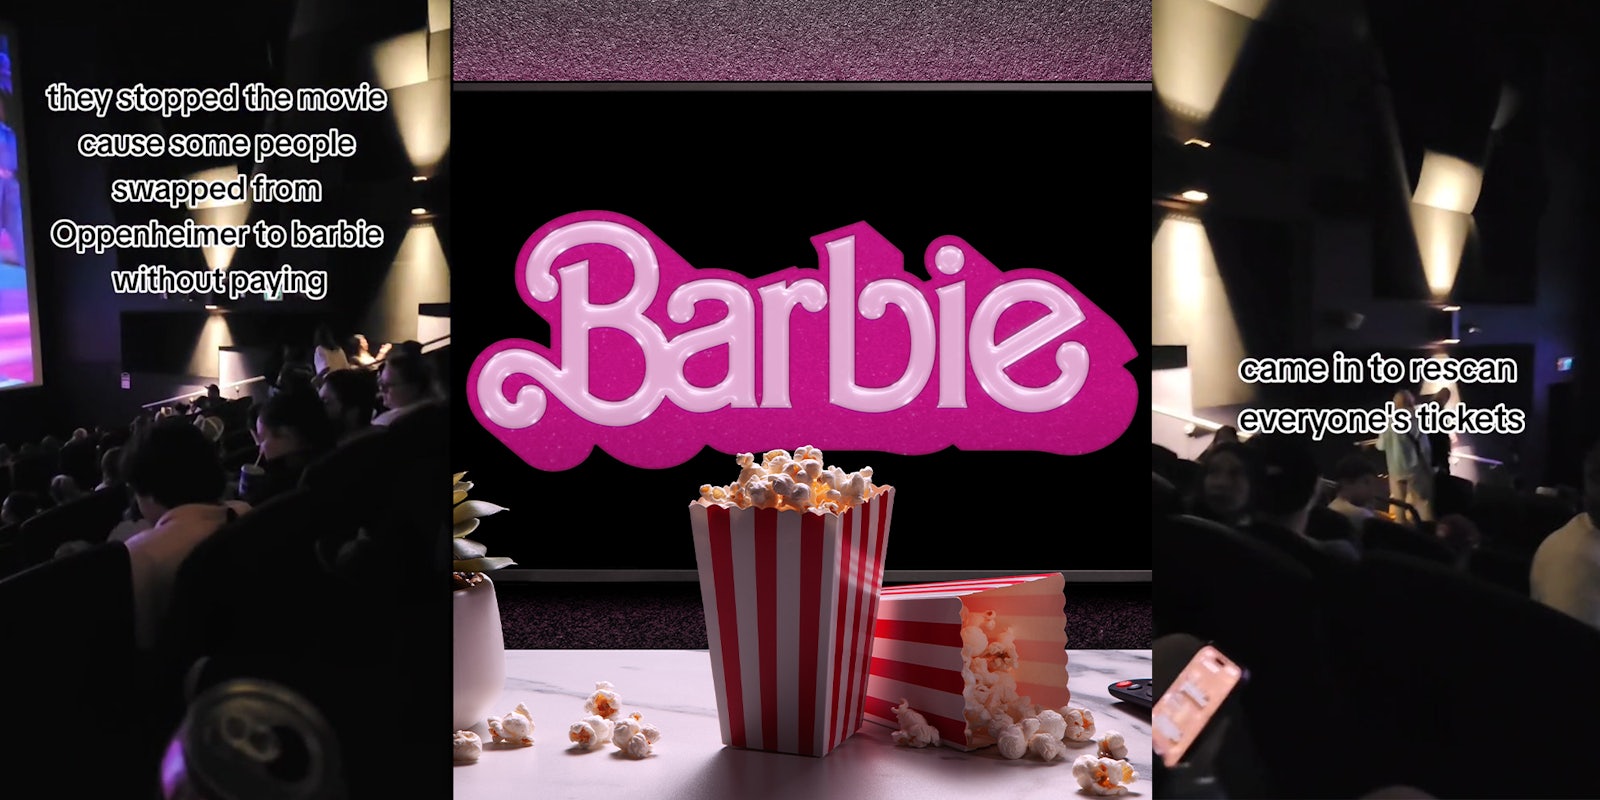 Movie theater stops 'Barbie' showing midway to rescan everyone's tickets after Oppenheimer watchers snuck in